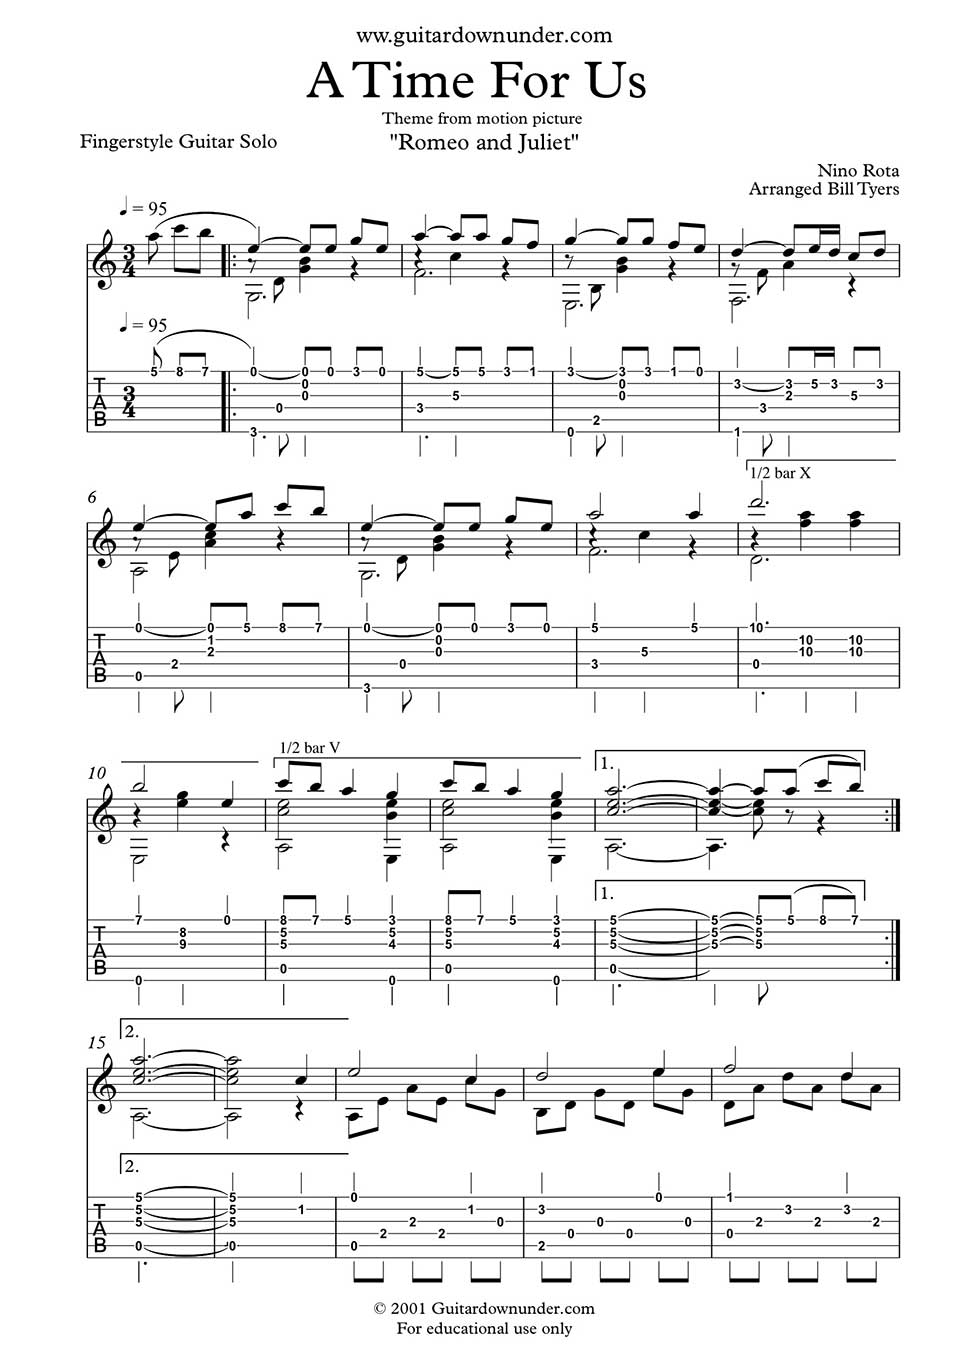 A Time For Us Arranged For Fingerstyle Guitar By Bill Tyers